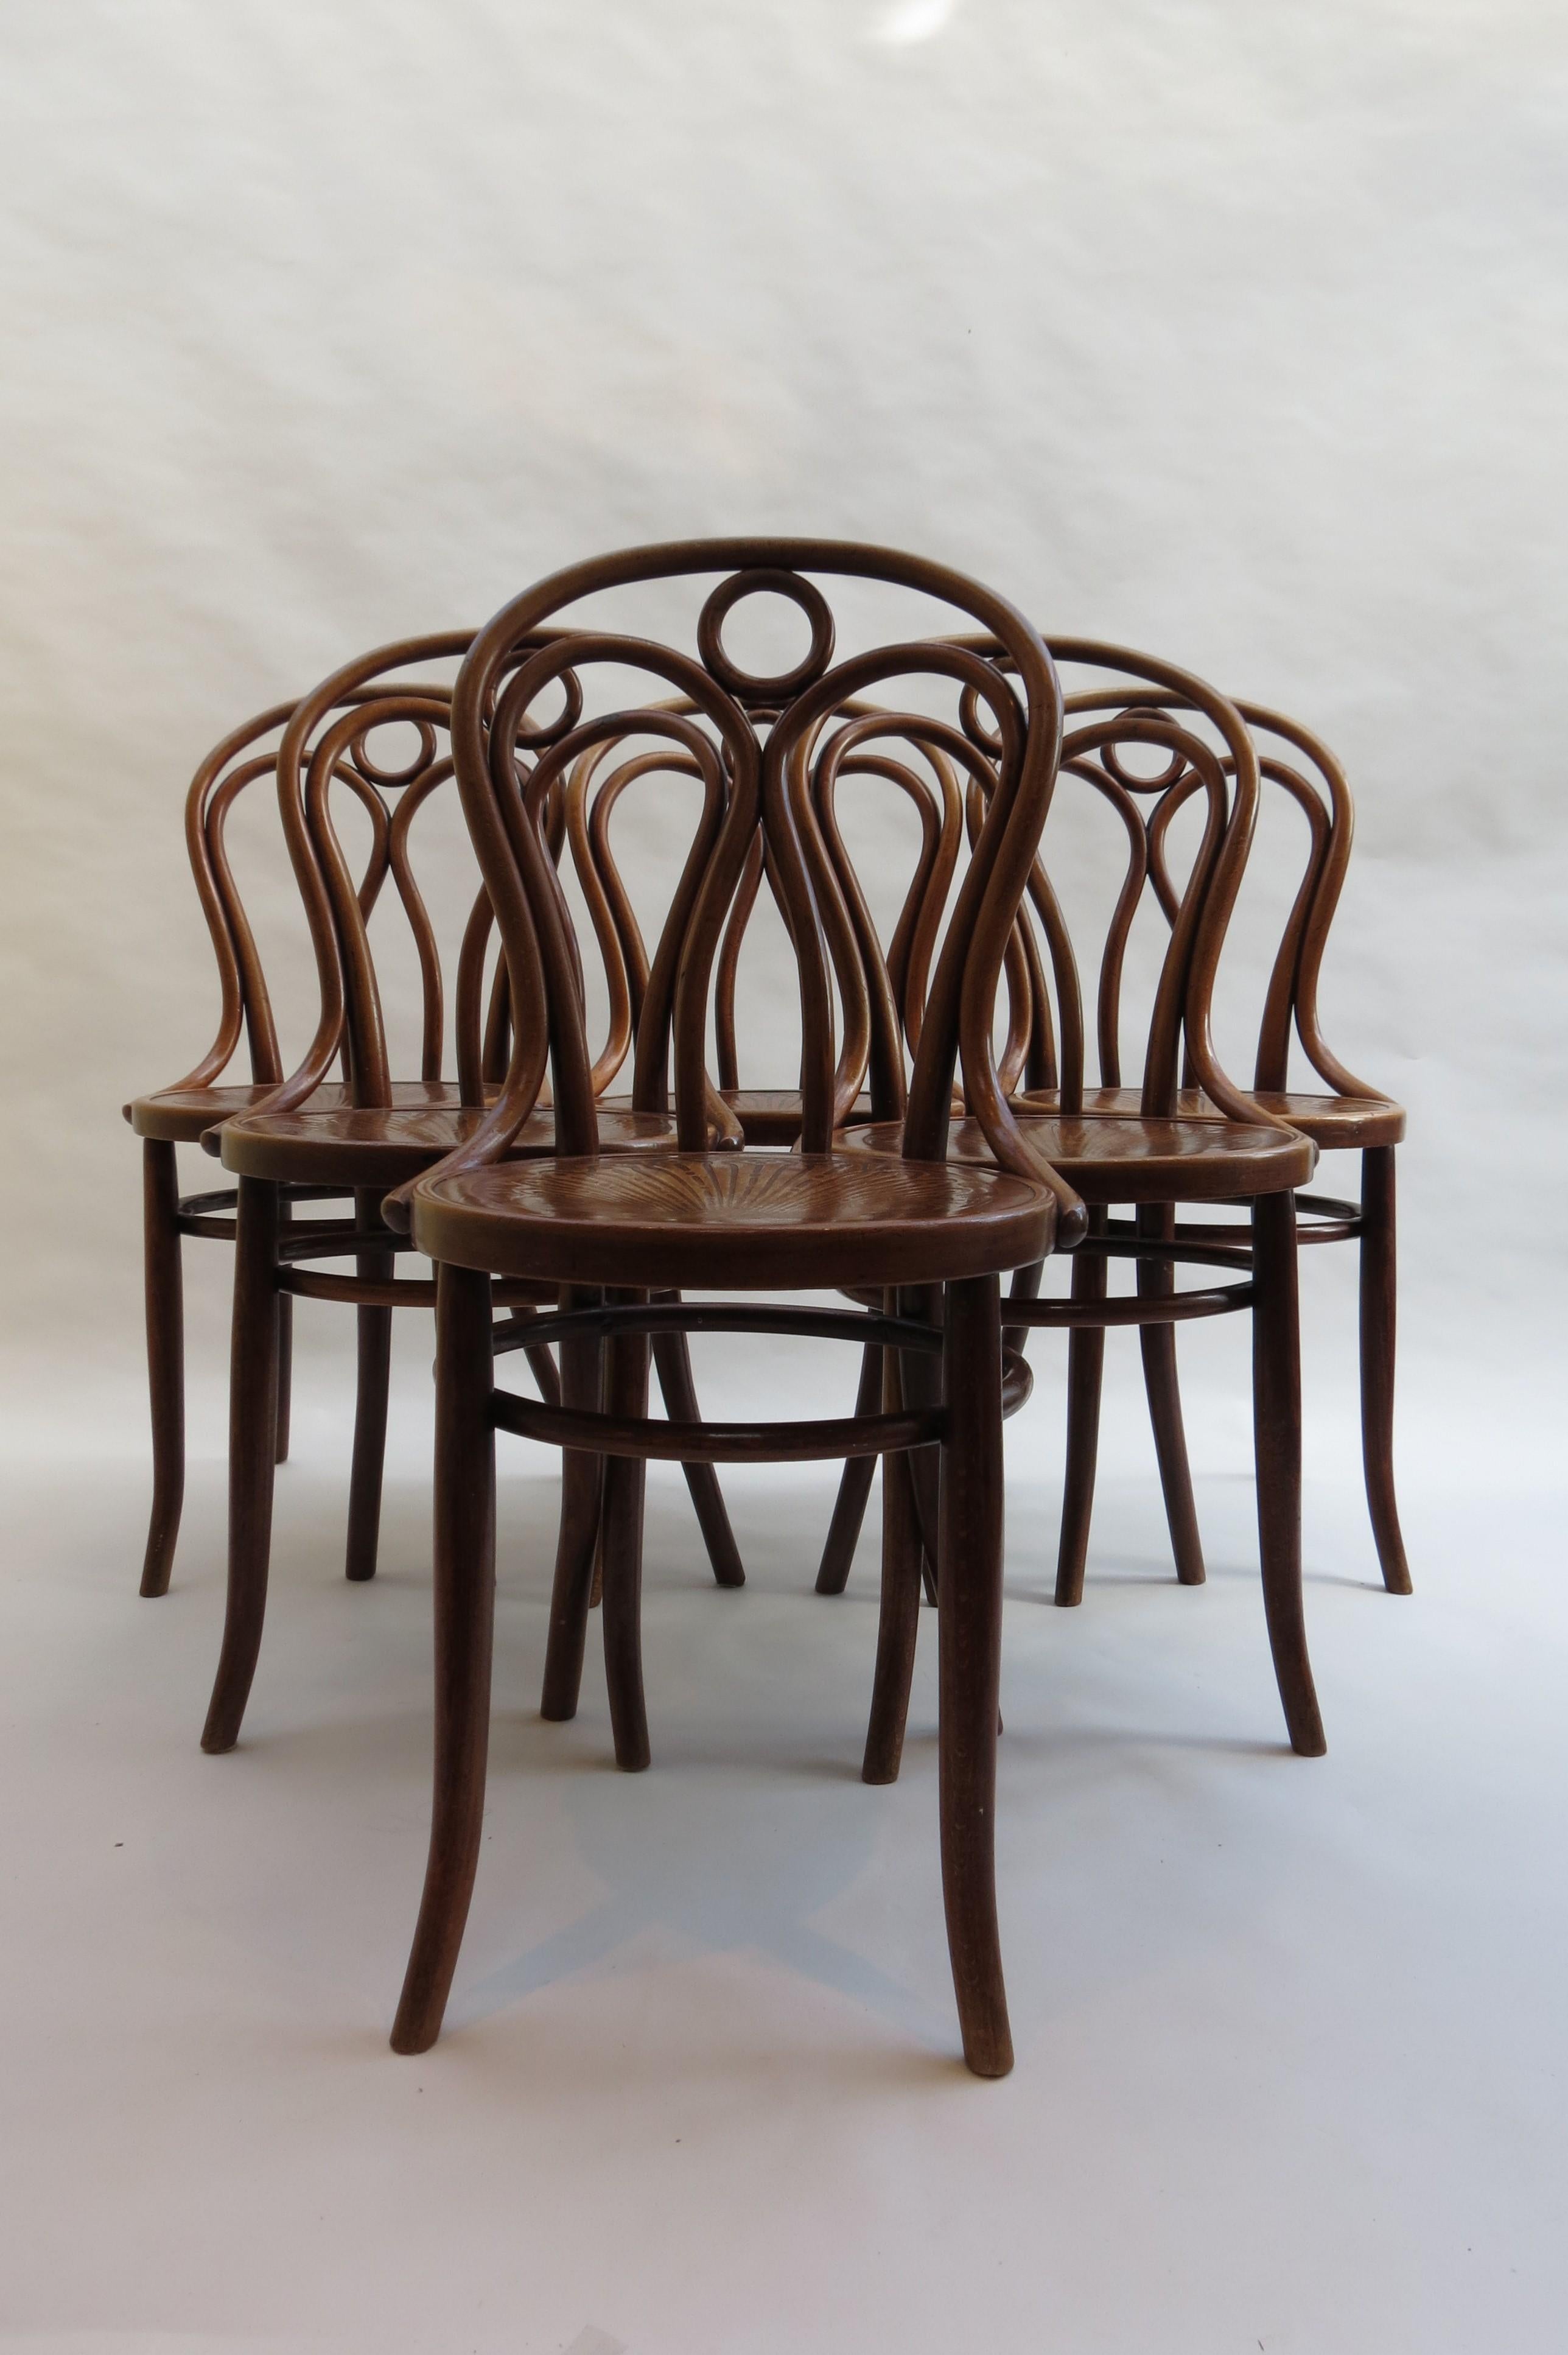 Set of 6 Jacob and Joseph Kohn dining chairs, model number 36. Made from bentwood beech. Date from the early 1900s. In wonderful condition, they retain the original finish, nicely patinated. 
In good original condition, with some signs of wear to